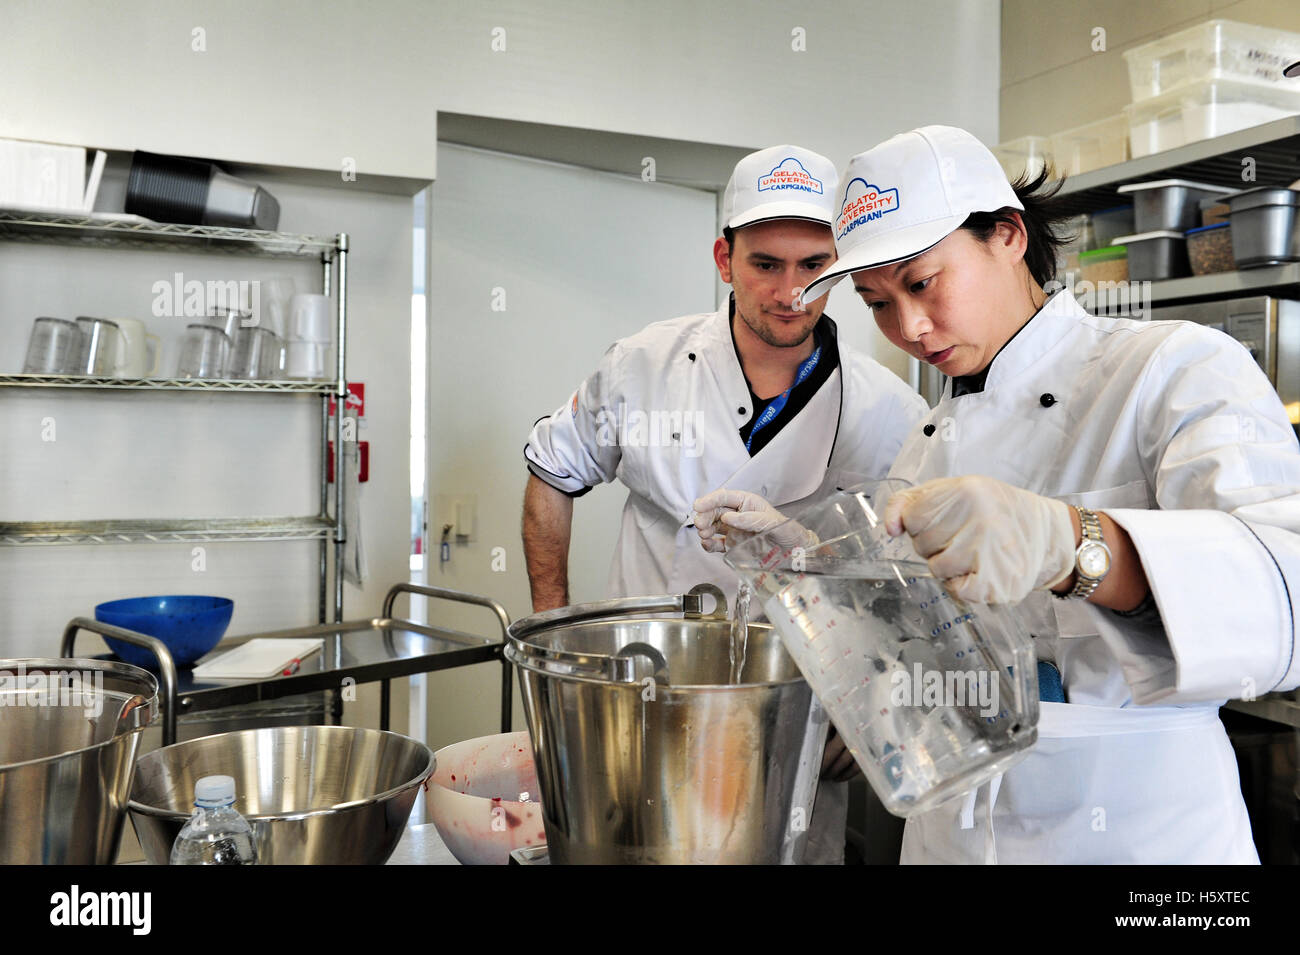 Students at work during a practical lesson at the Carpigiani Gelato University in Anzola nell'Emilia near Bologna, Italy. Stock Photo